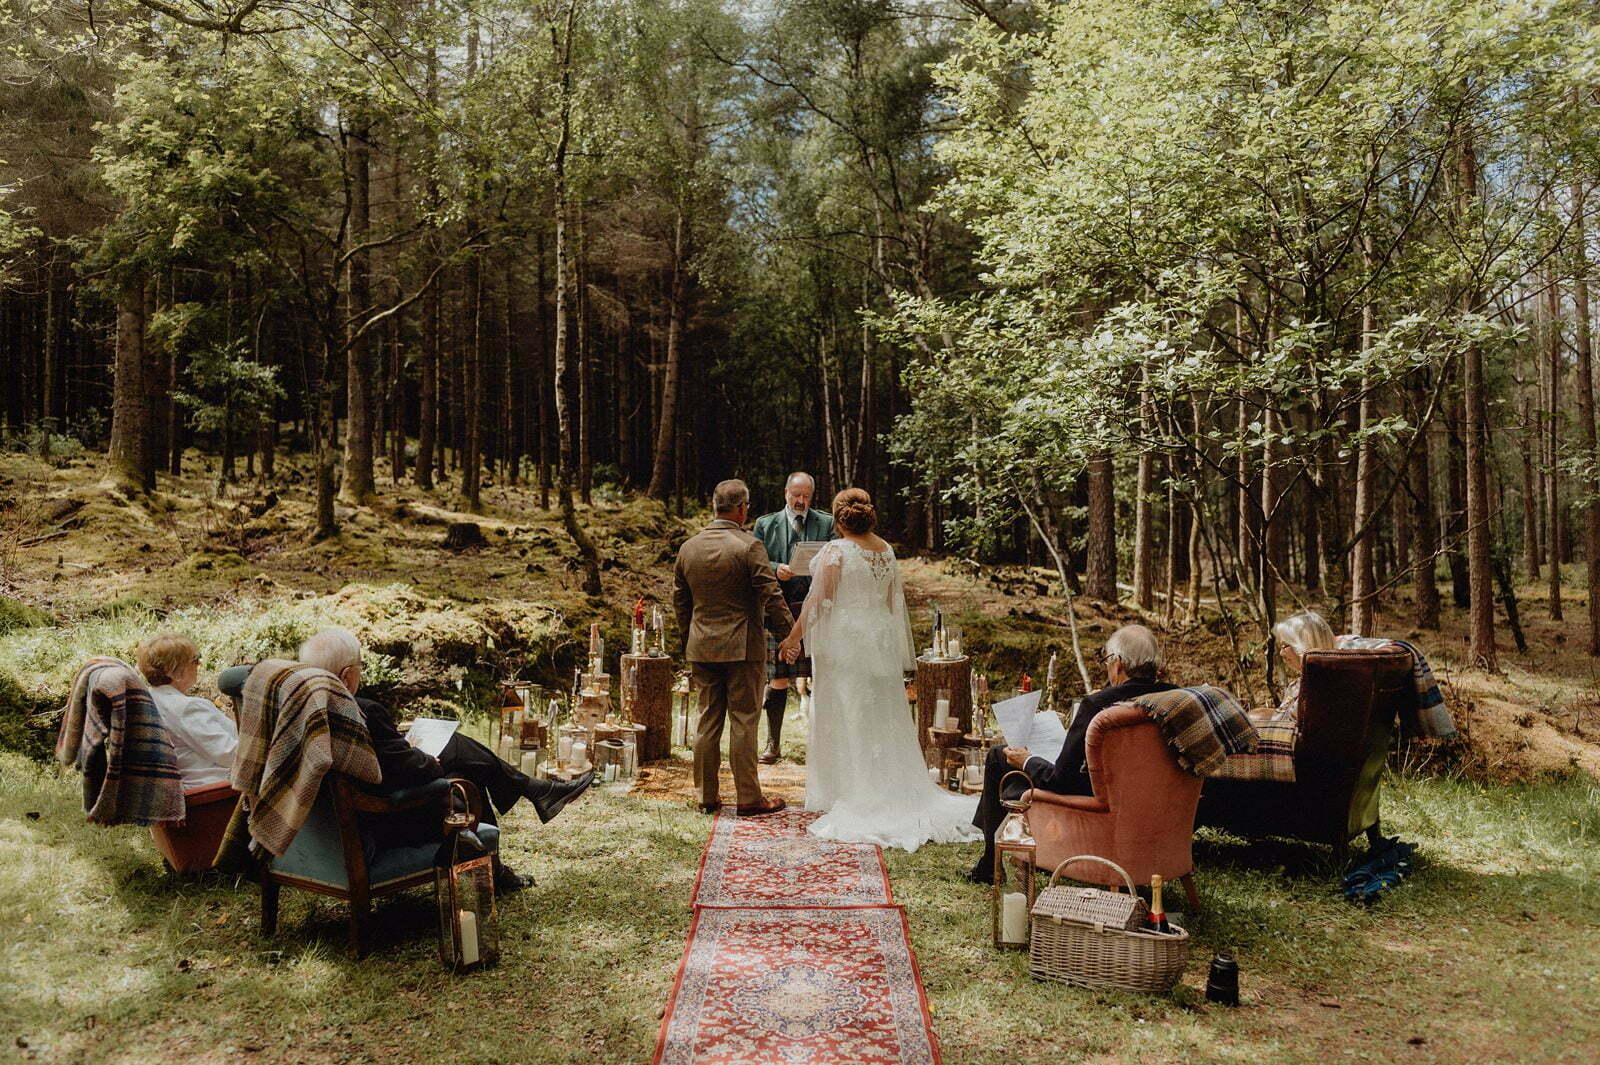 Glencoe elopement Scotland outdoor humanist ceremony with rugs and chairs styling by we are gloam rustic quirky romantic wedding setup